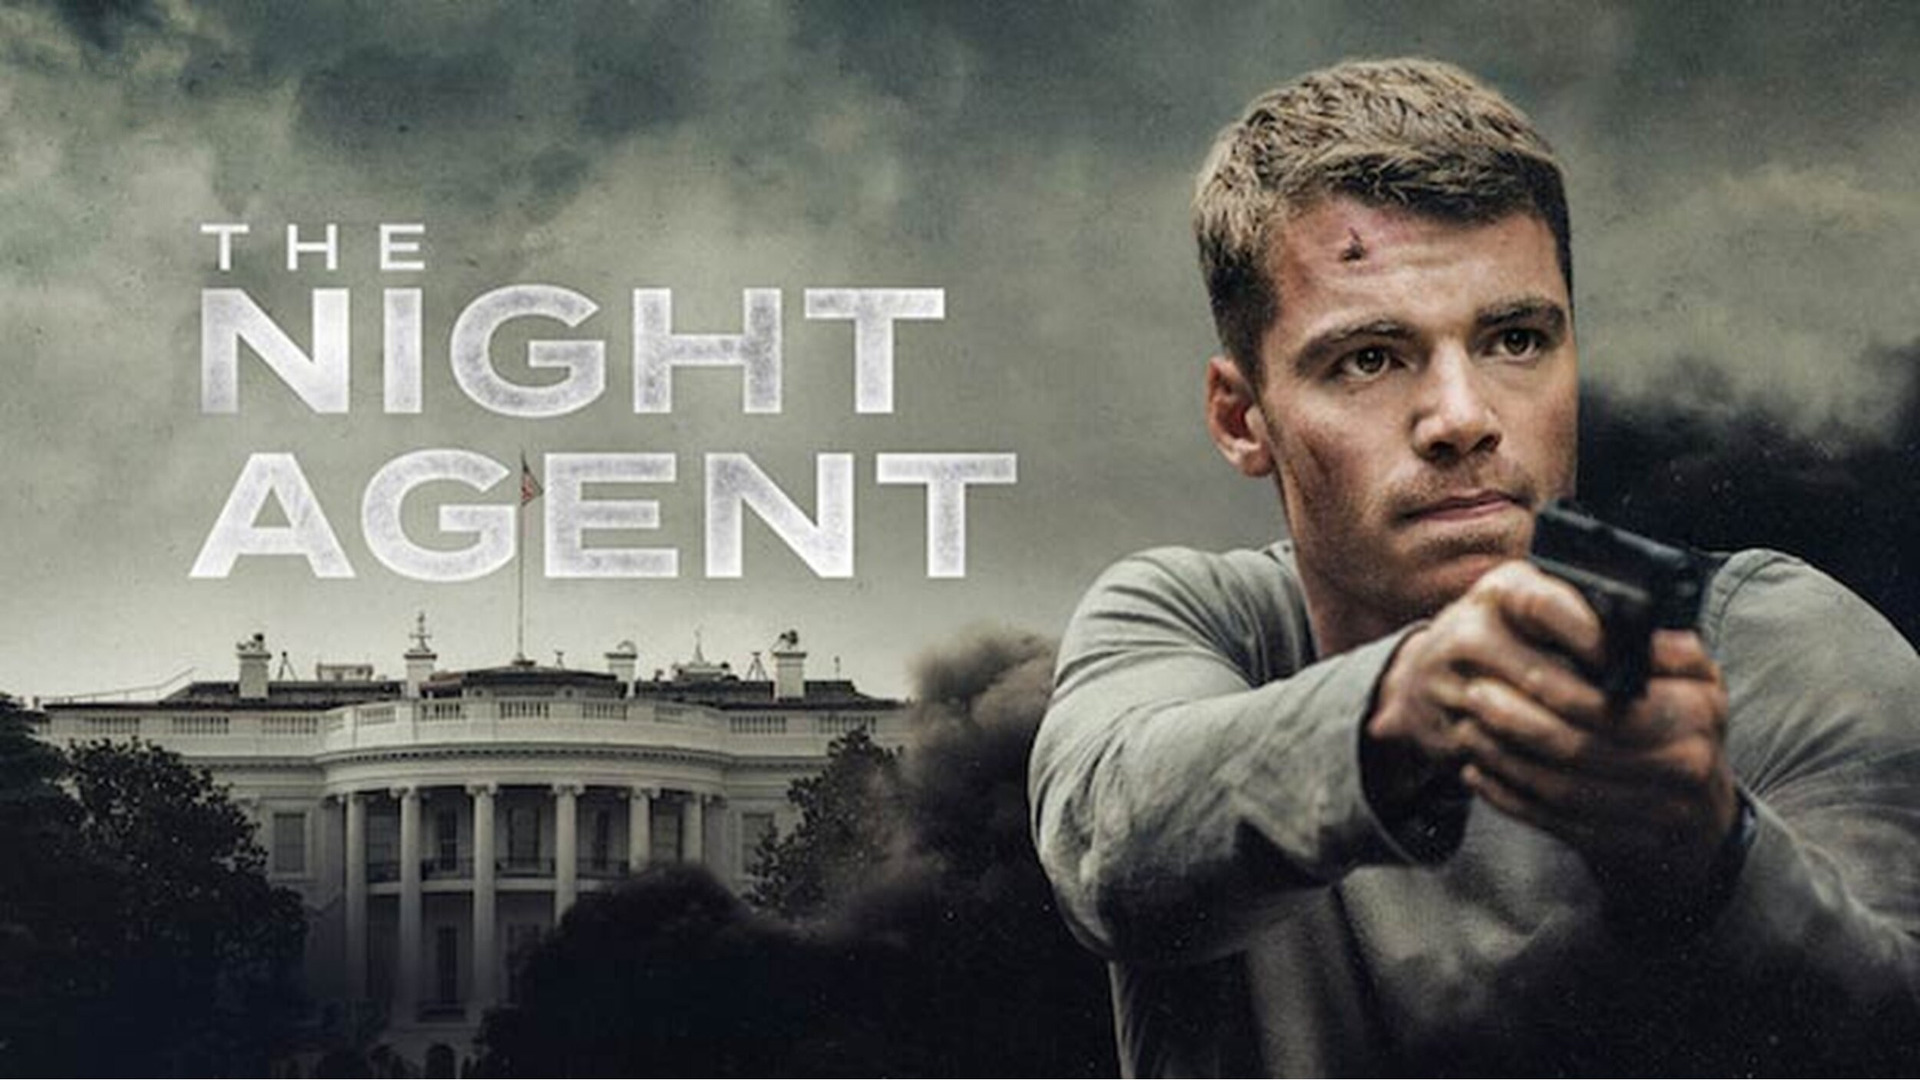 Show The Night Agent